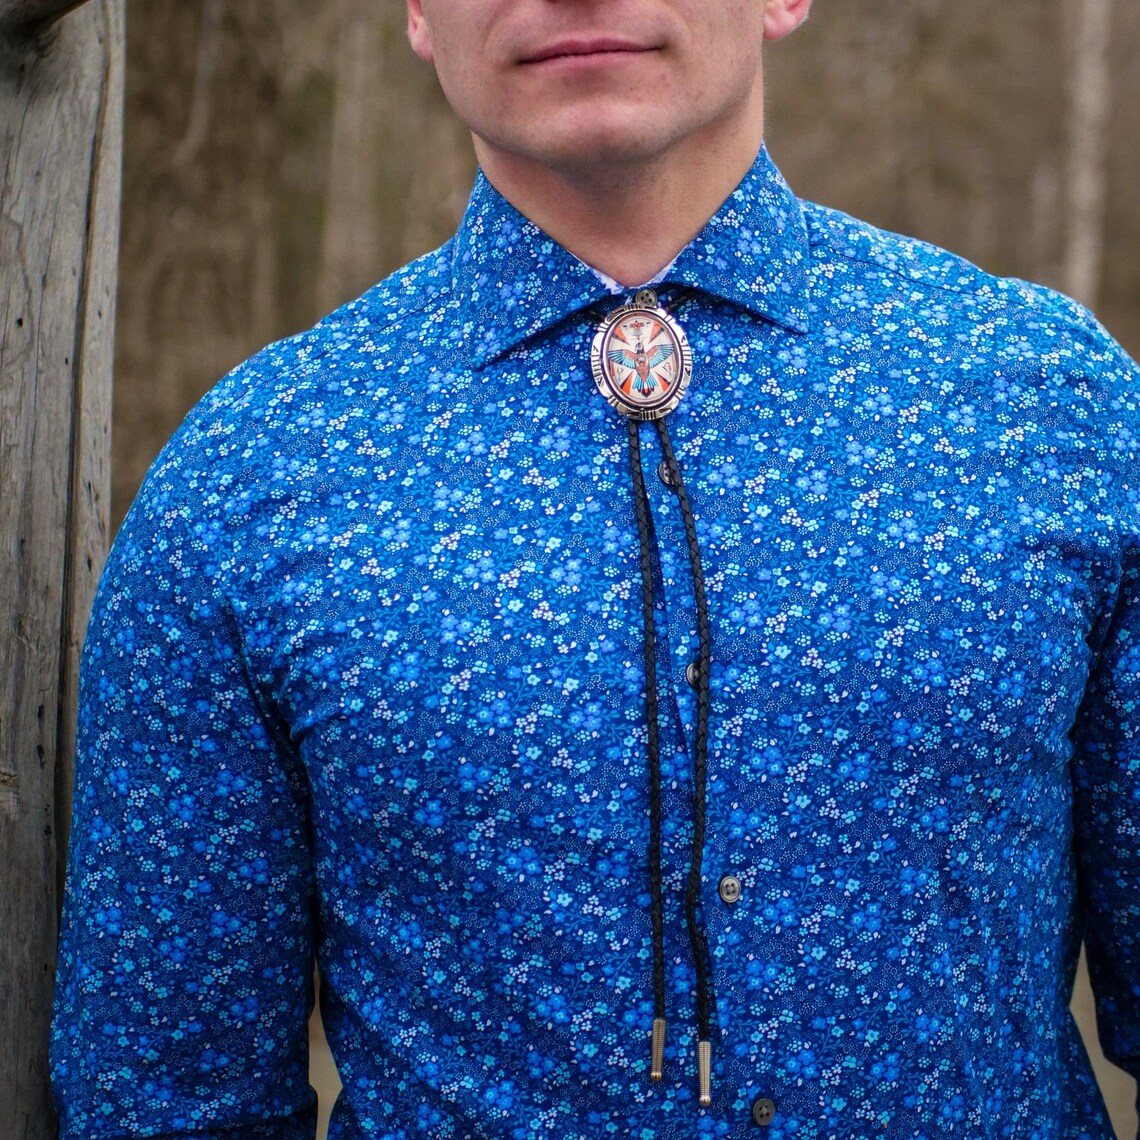 Does anyone wear bolo ties anymore